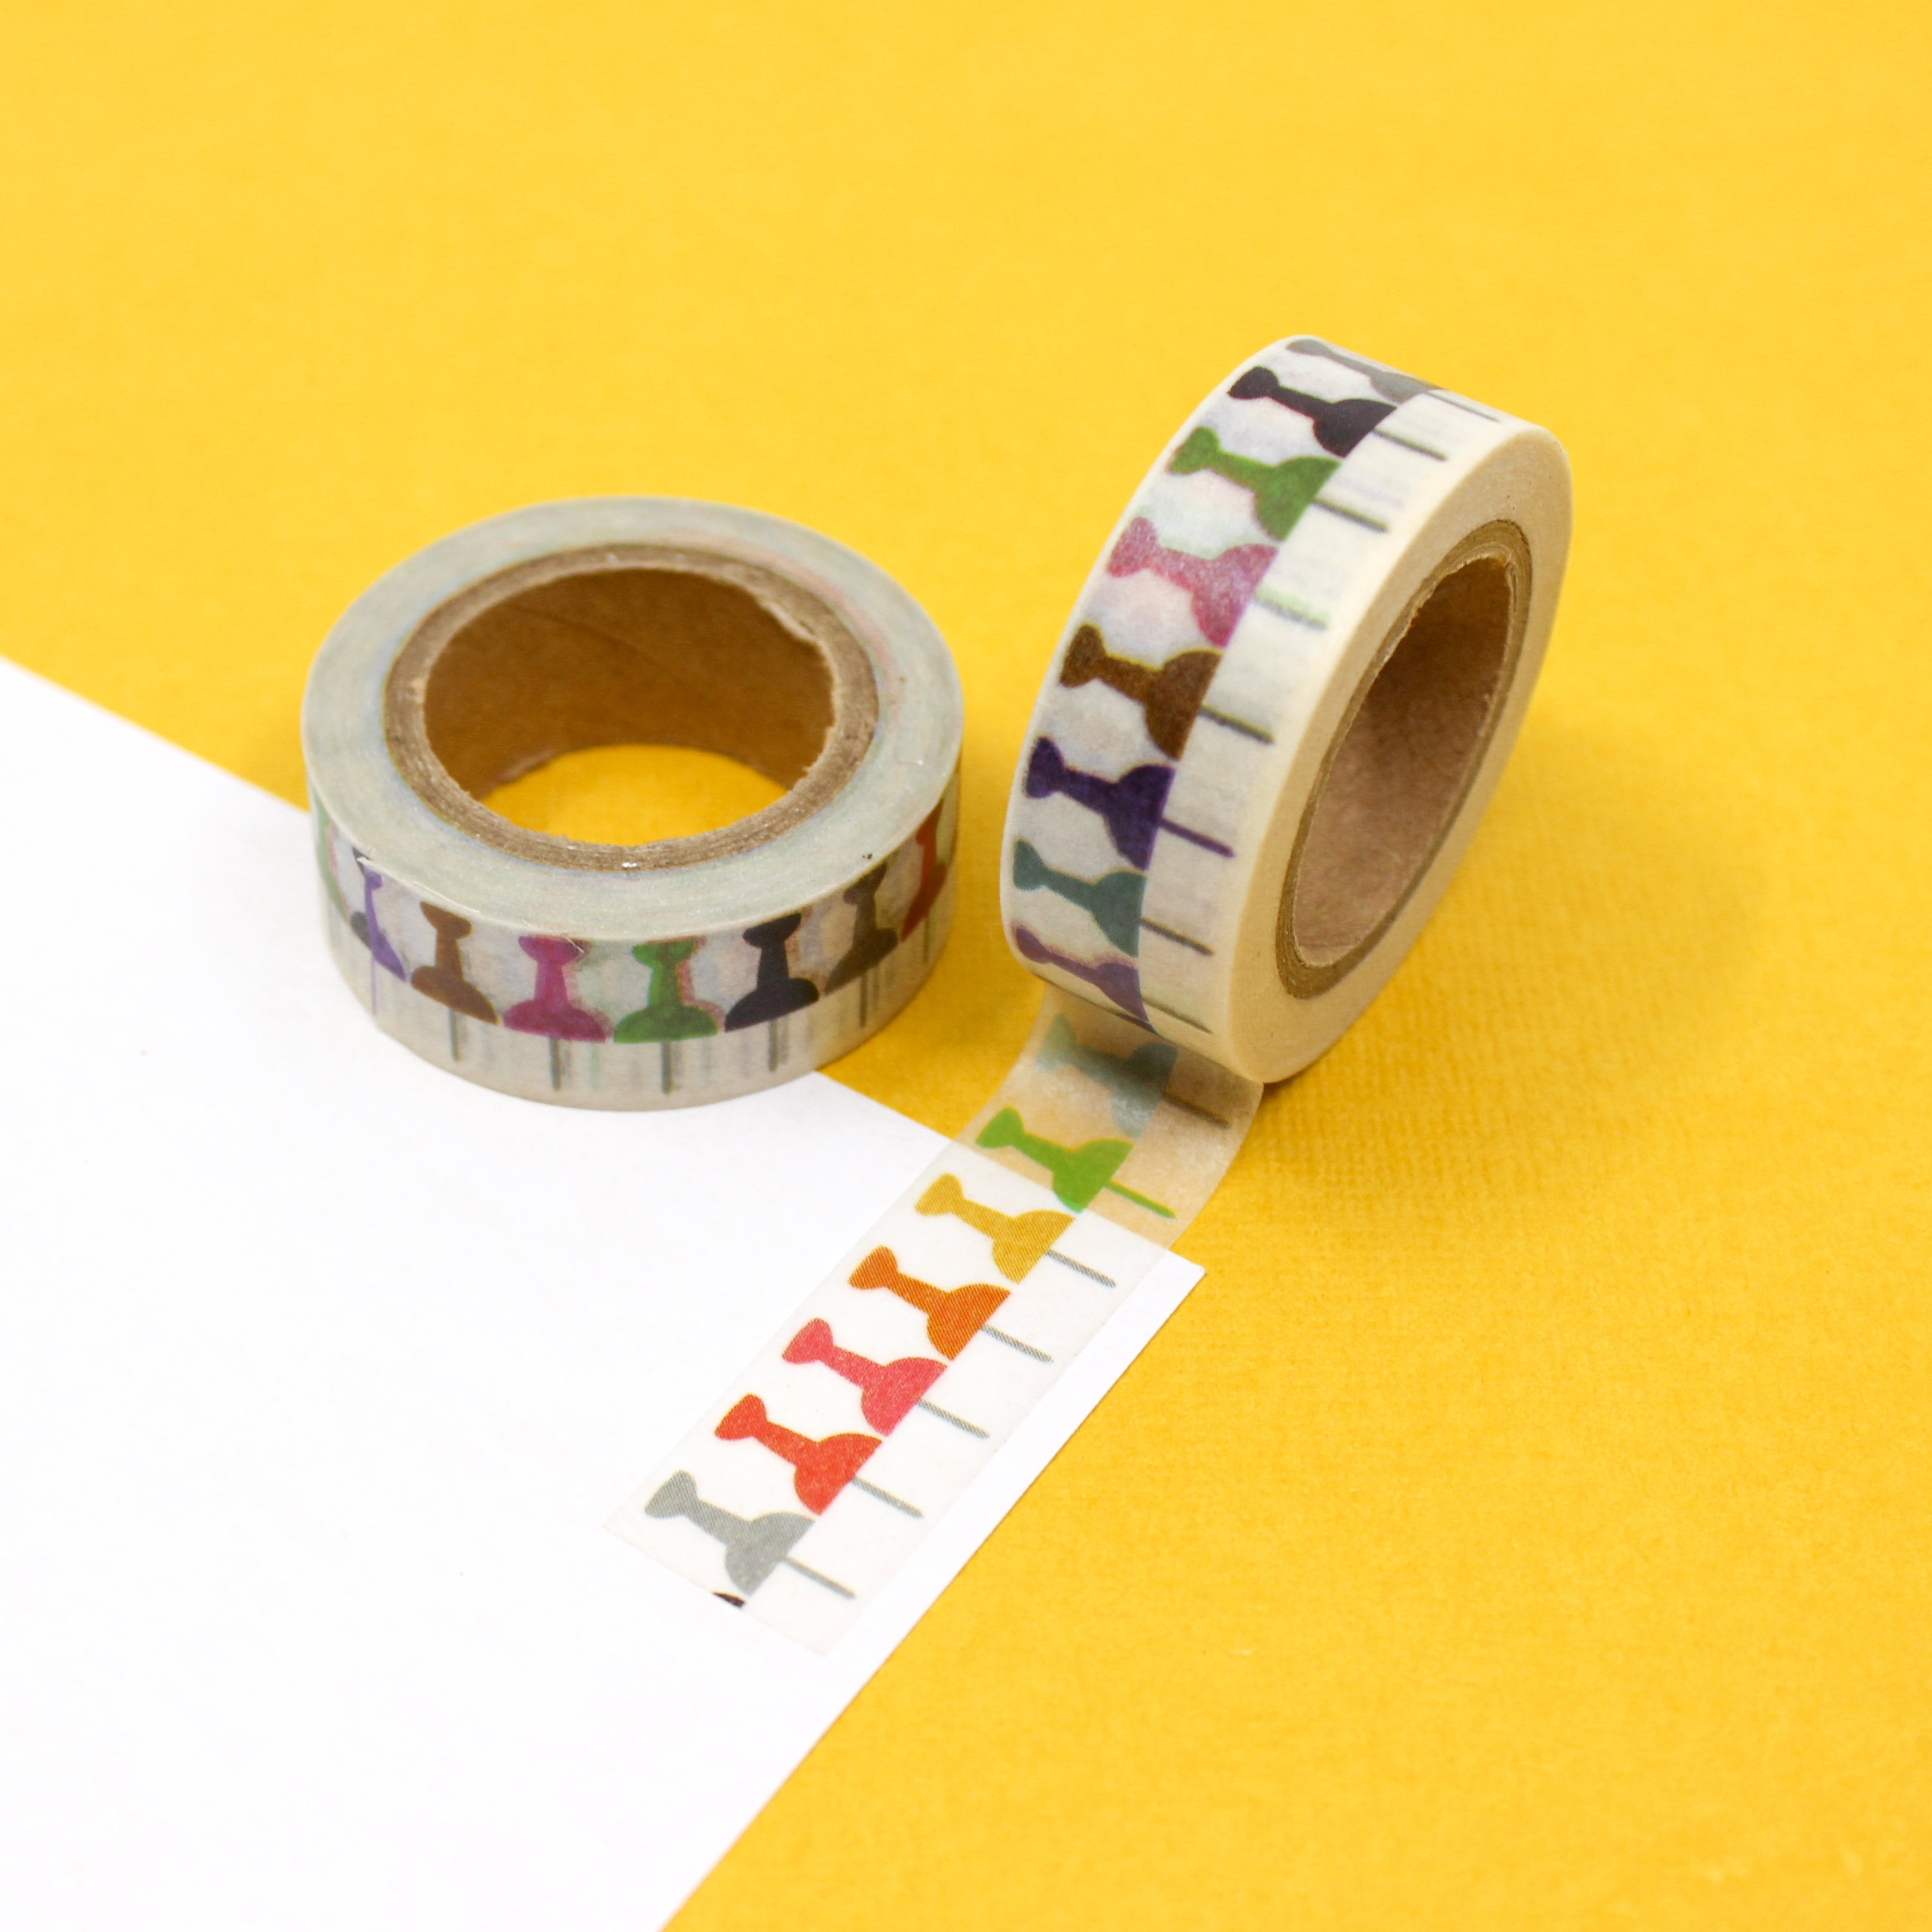 Grid Washi Tape Set for Journaling - 18 Rolls Aesthetic Decorative Tape,  Colored Grid Masking Tape for Scrapbooking, Crafts, Bullet Journal, School  Supplies - Yahoo Shopping